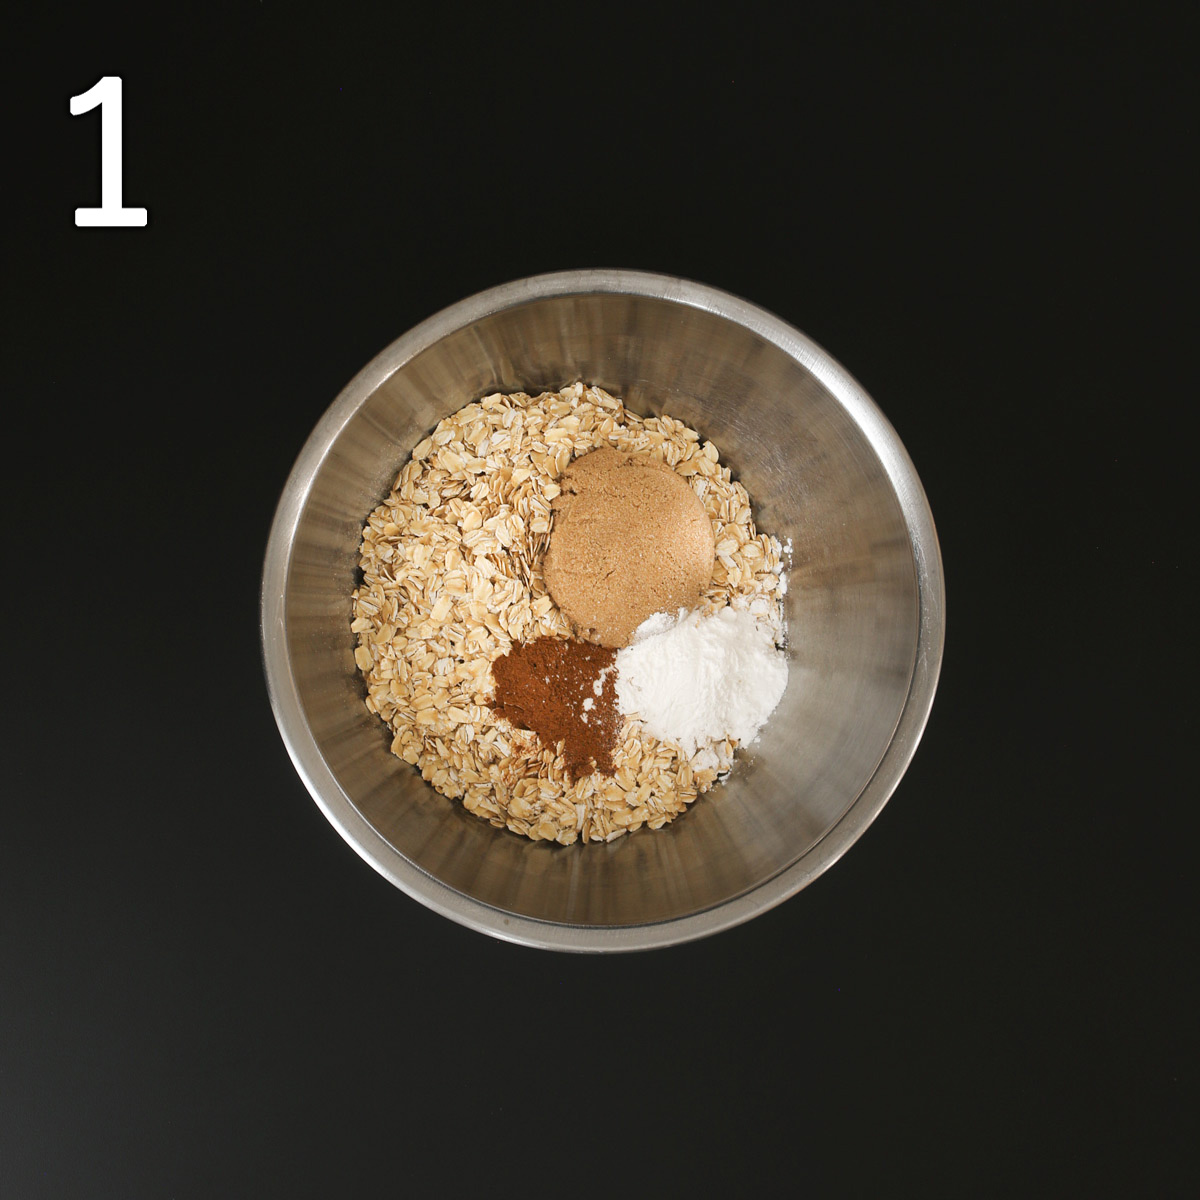 oats, leaveners, sugar, and spices in a steel mixing bowl.